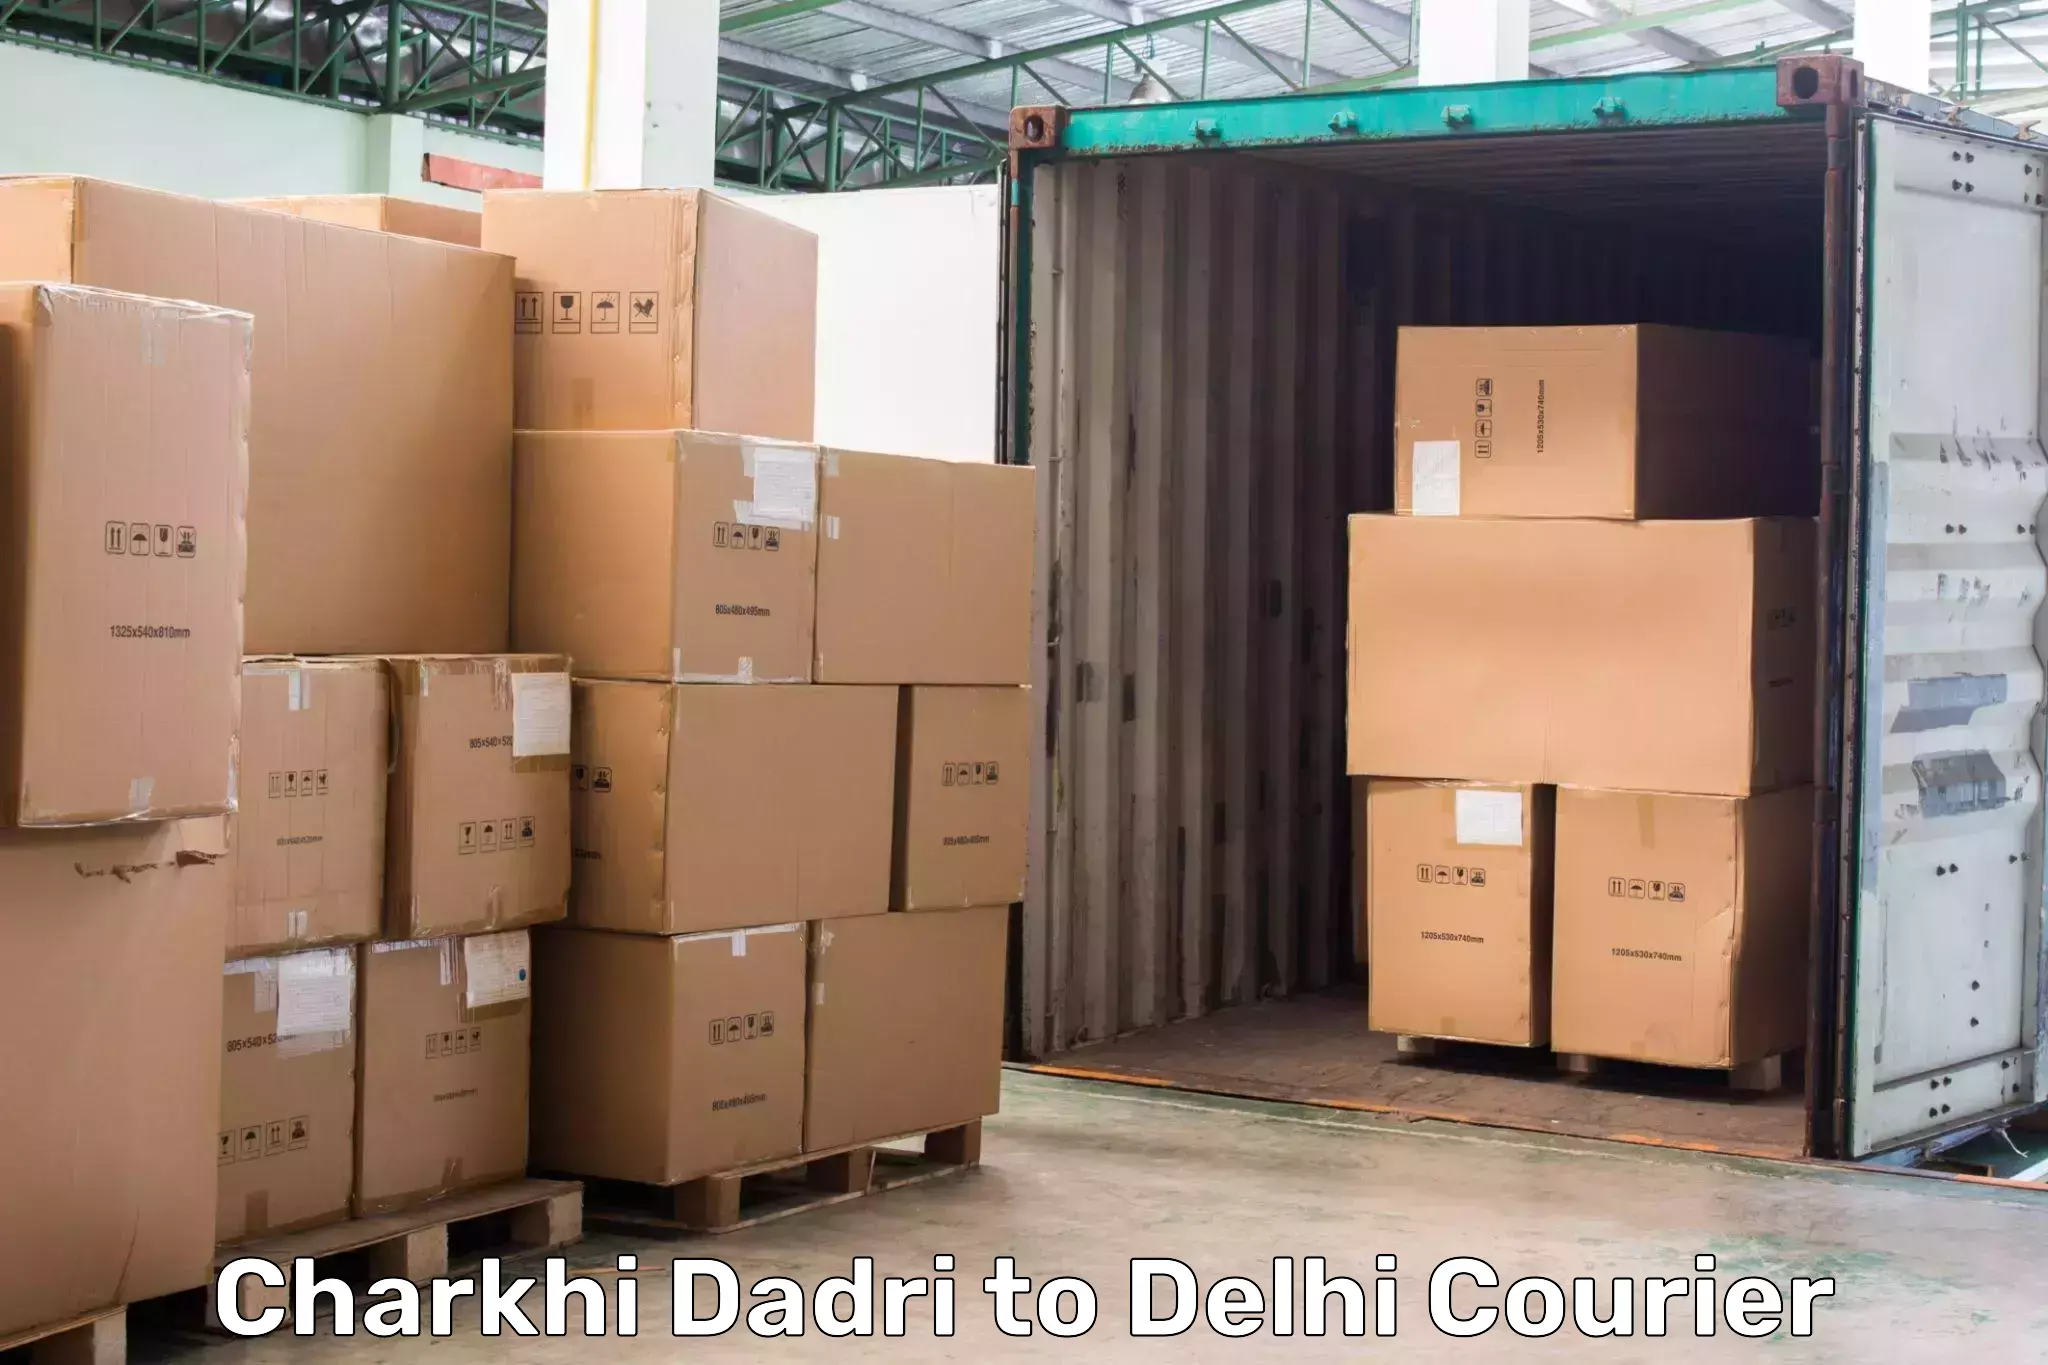 State-of-the-art courier technology Charkhi Dadri to Jhilmil